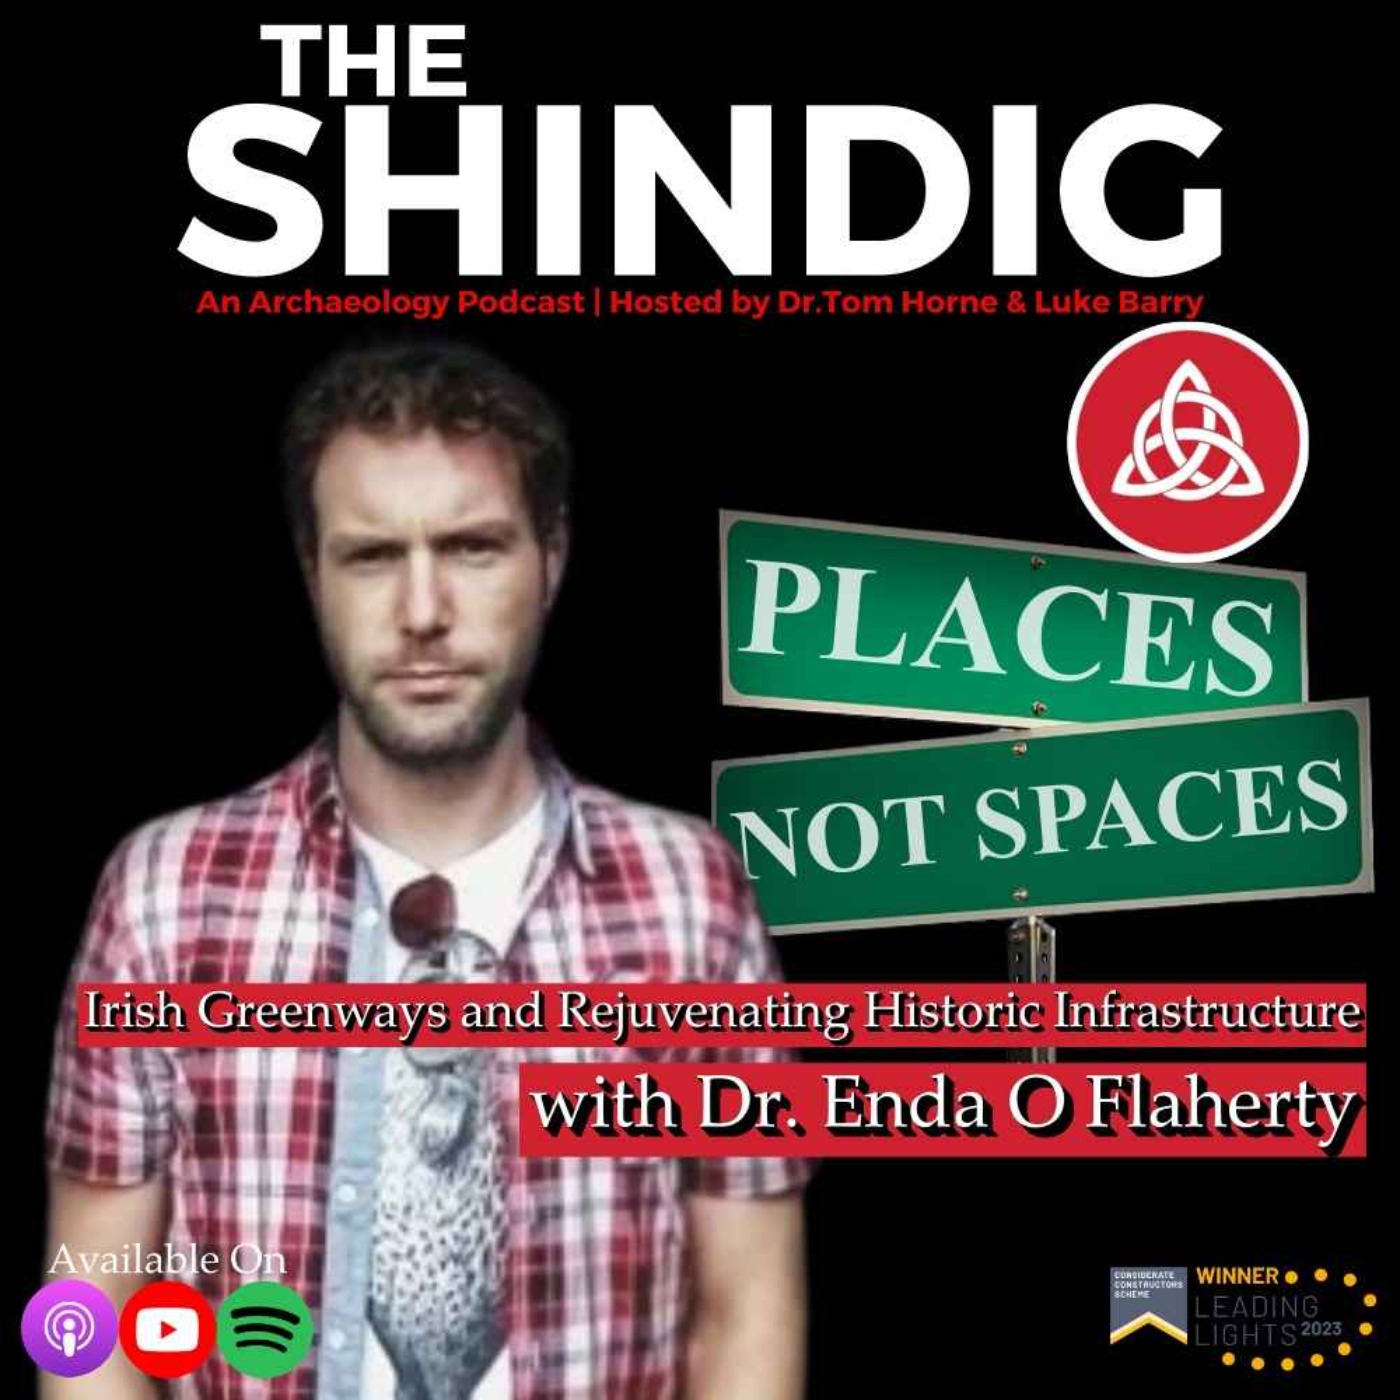 Irish Greenways and Rejuvenating Historic Infrastructures - With Dr. Enda O'Flaherty